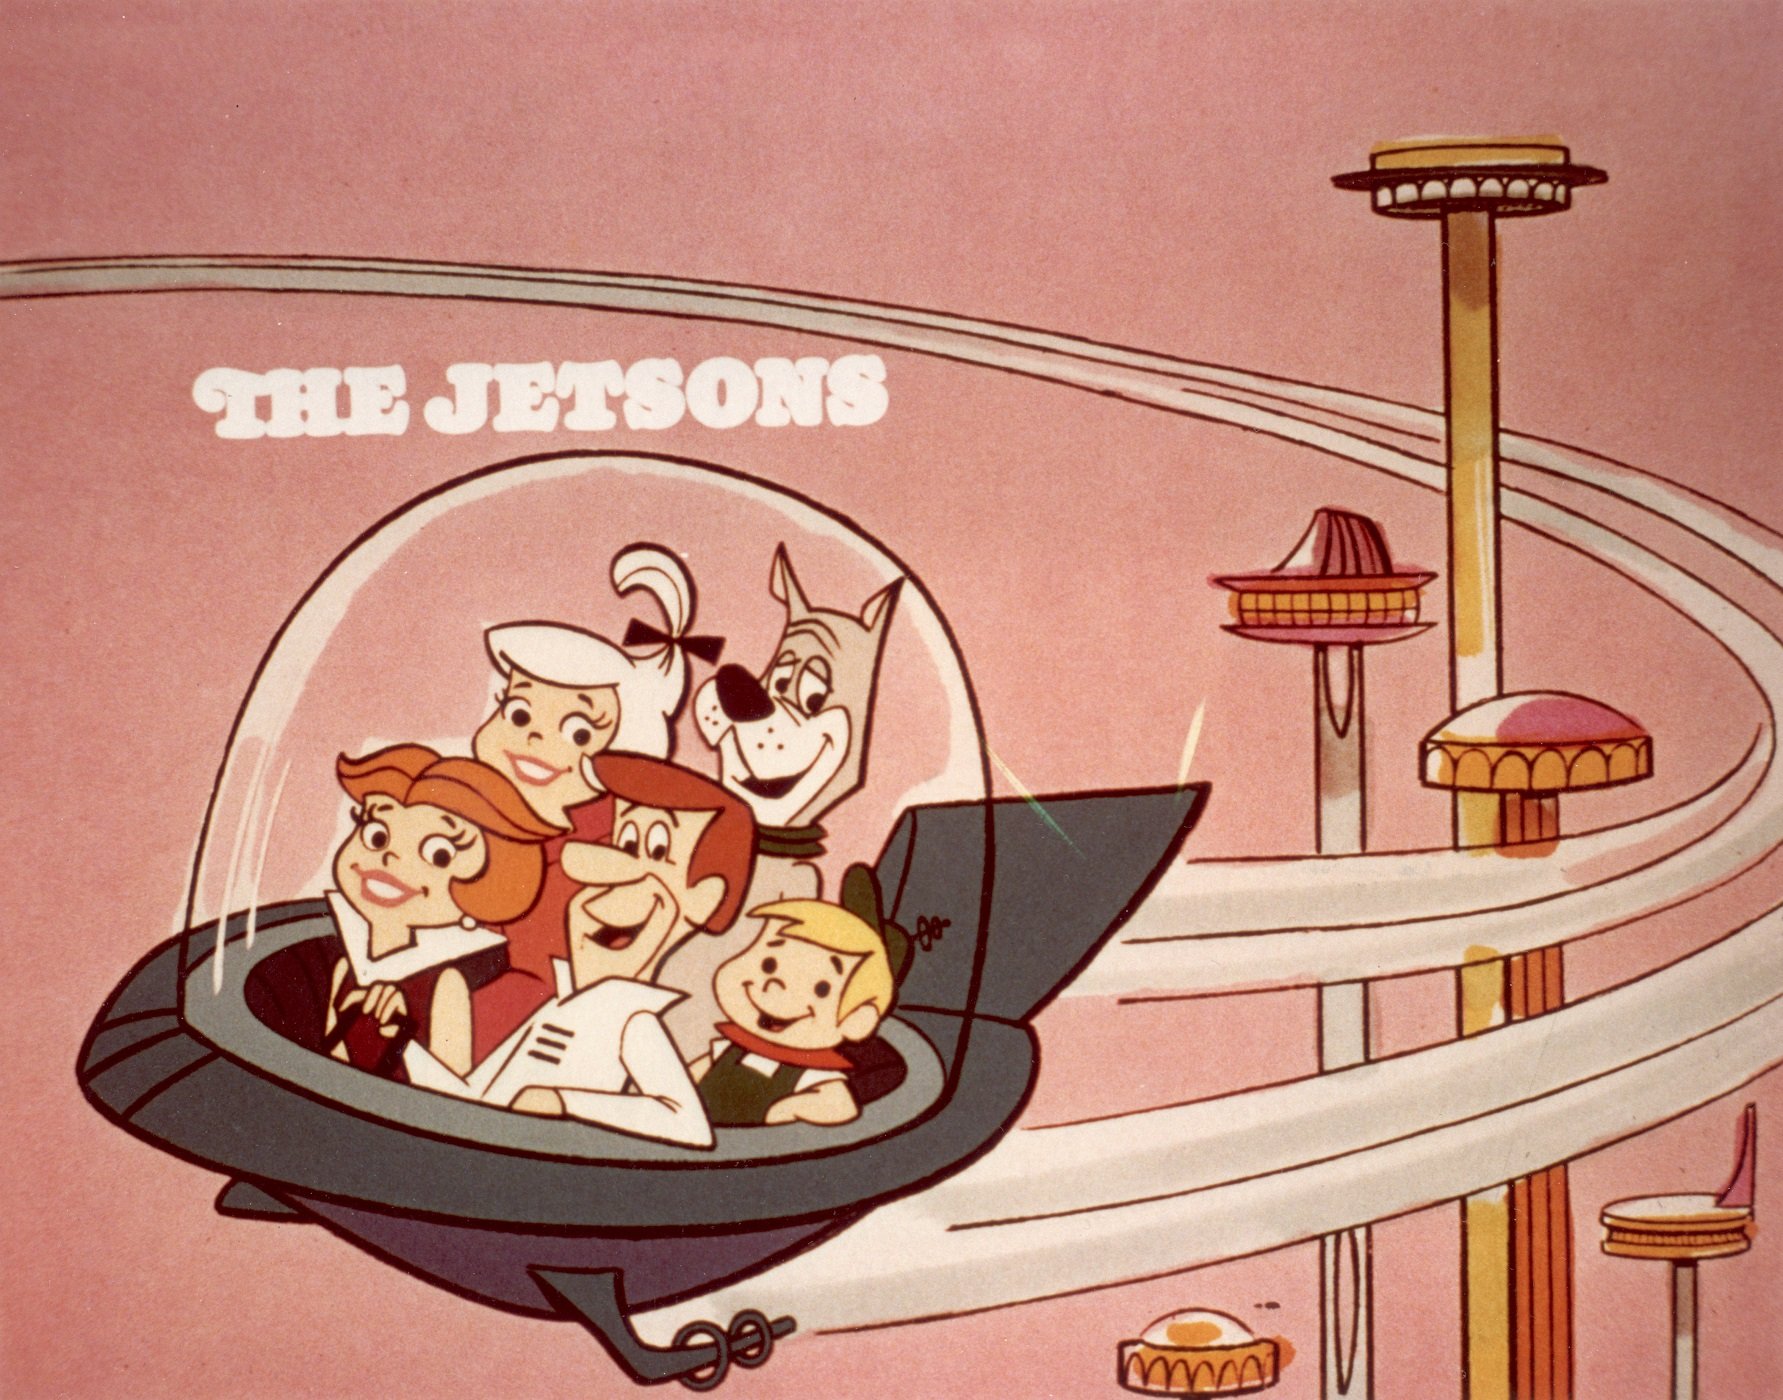 A still from 'The Jetsons' showing George, Jane, Judy, Elroy and Astro in the family's flying car. The family's fictional city is seen in the background